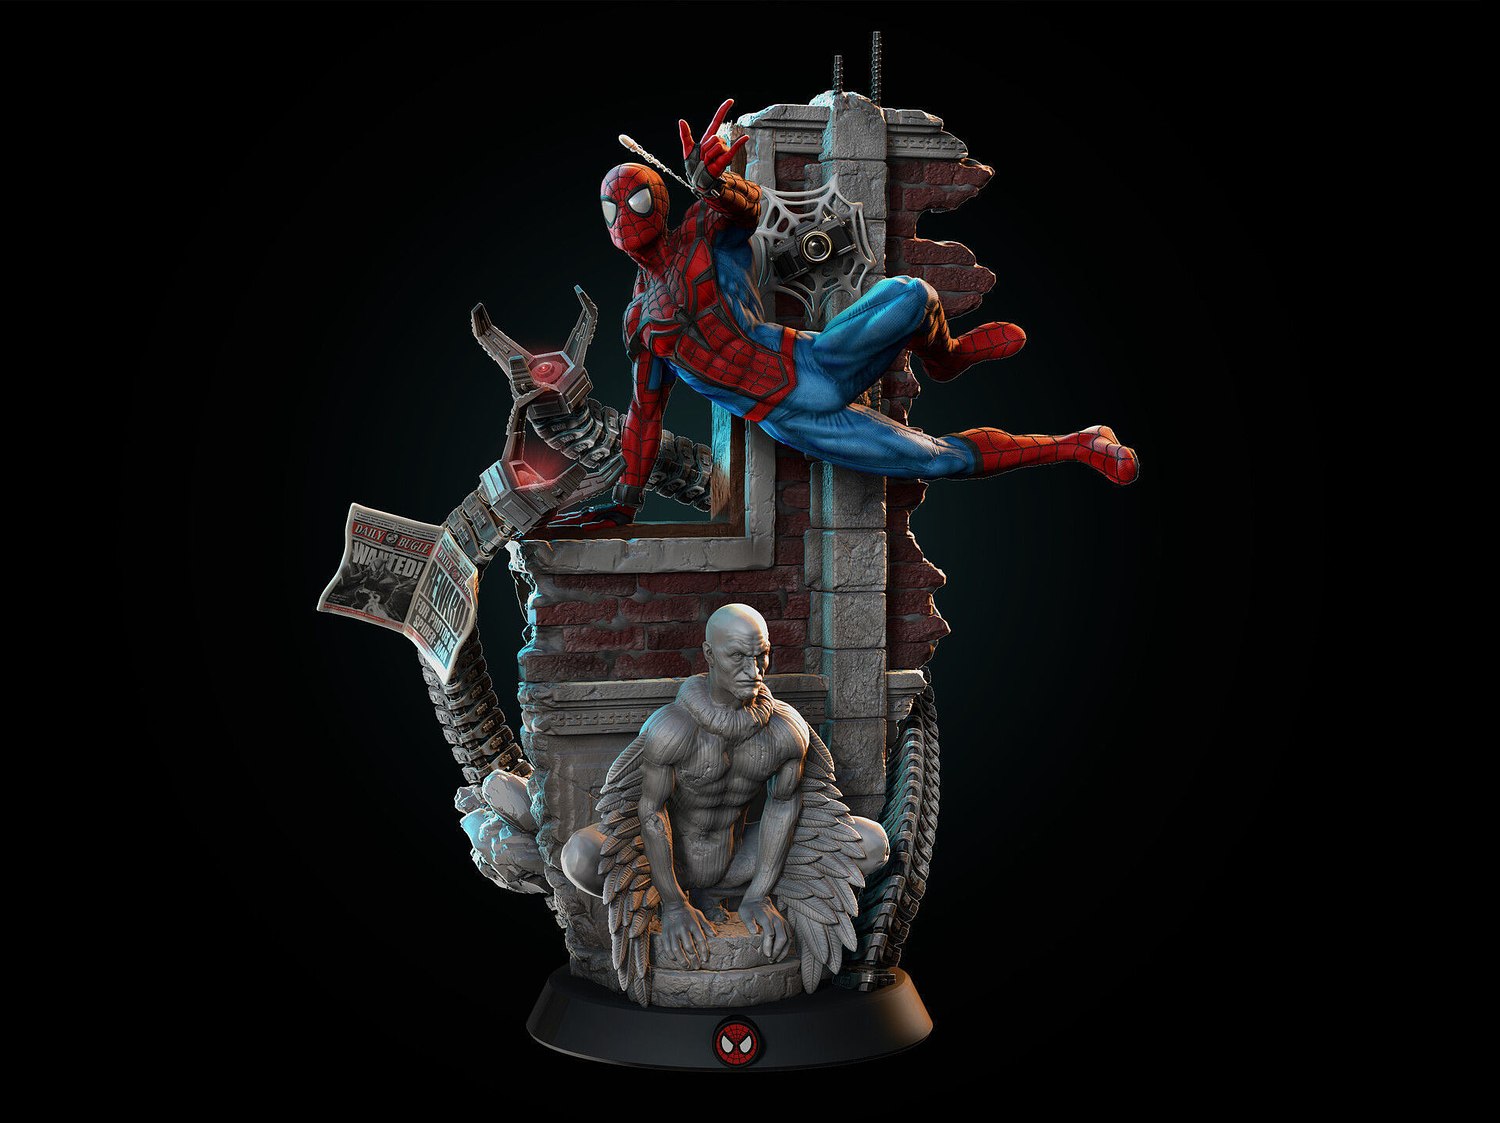 Spiderman Diorama from Marvel